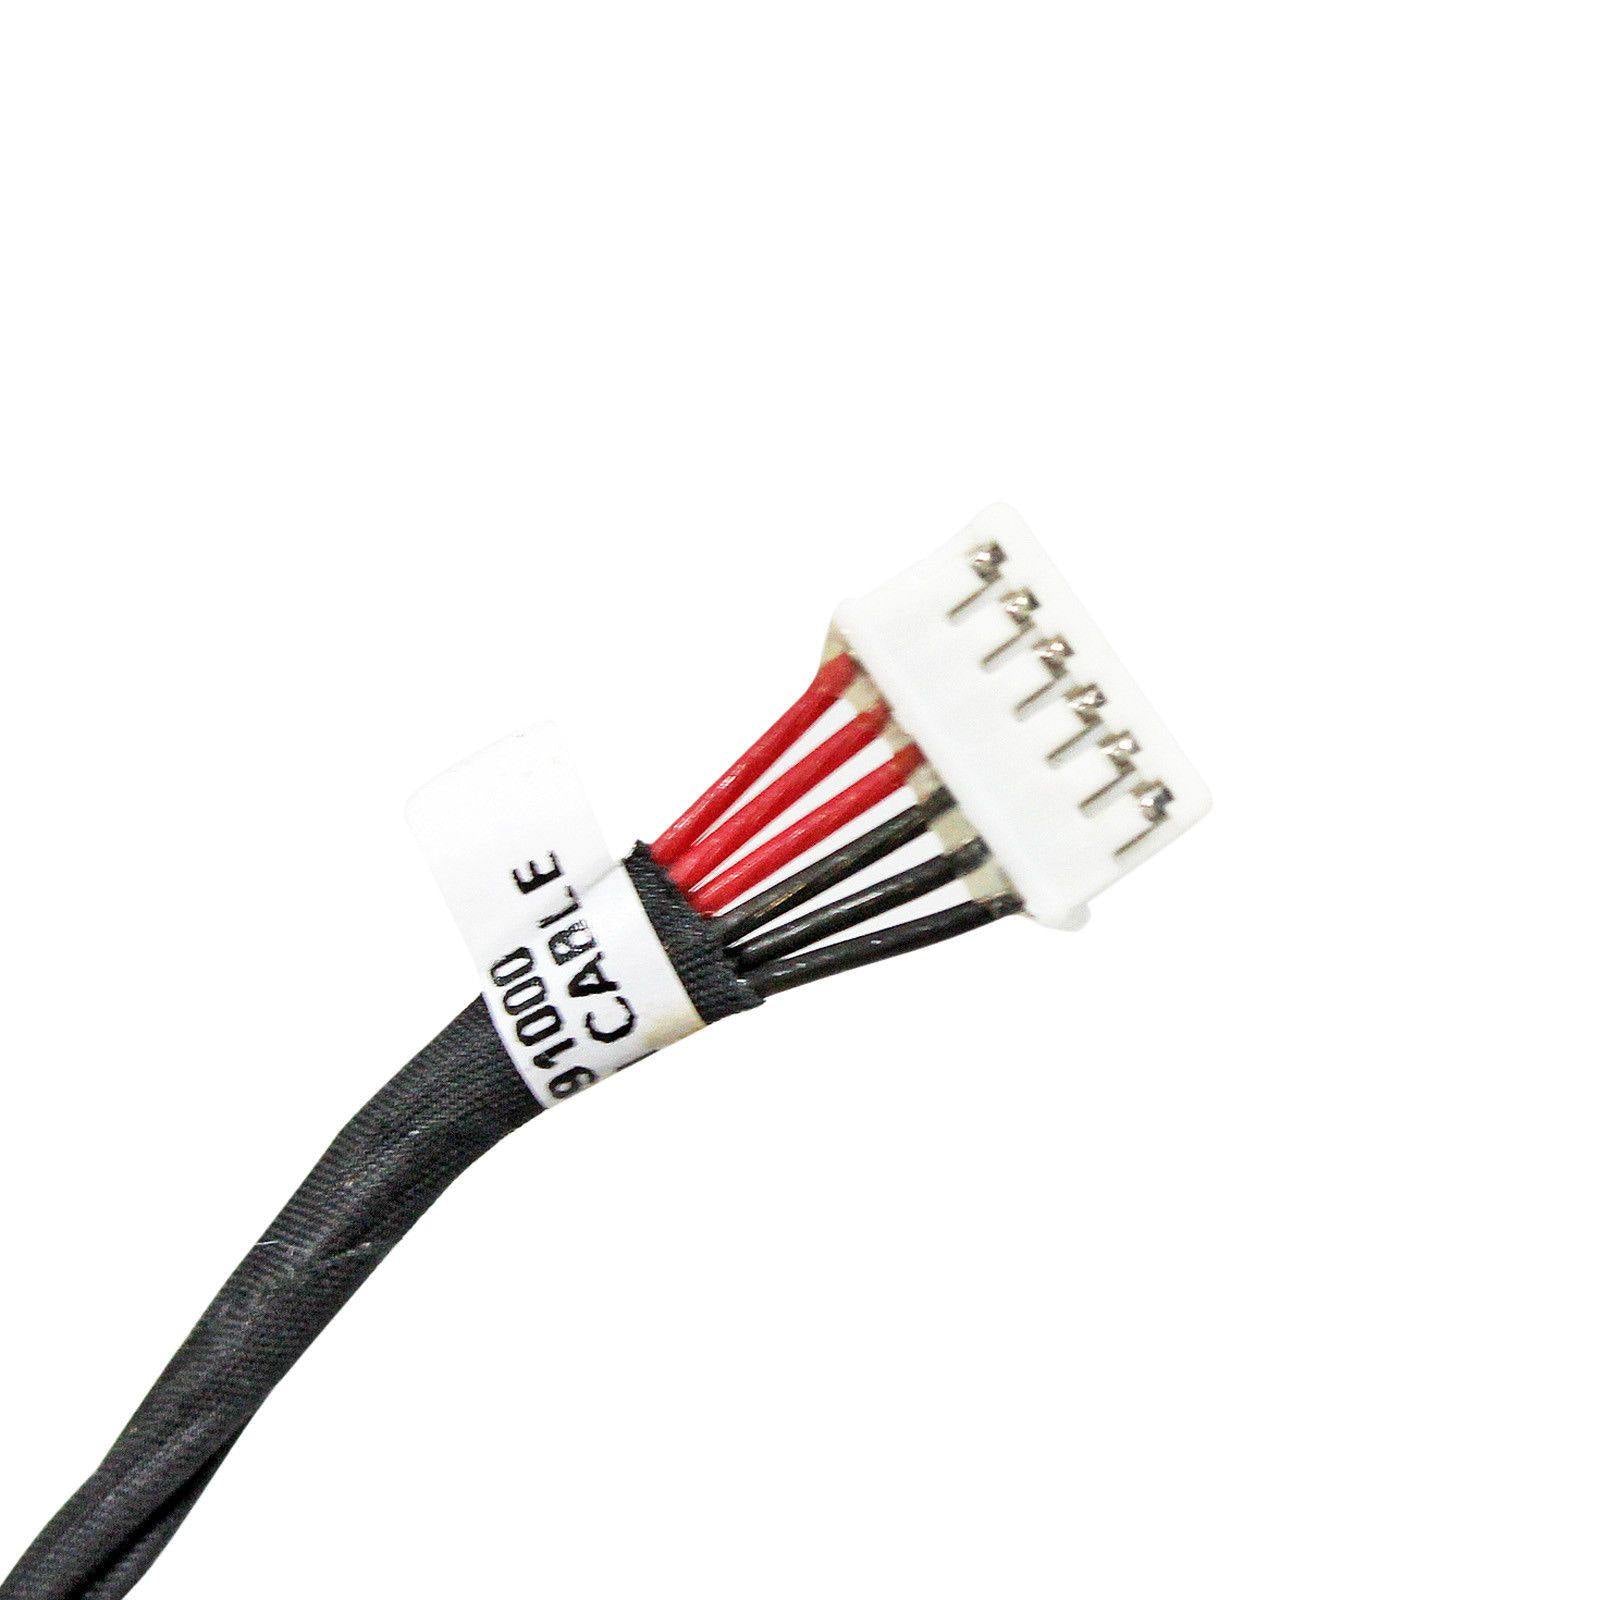 New Asus X750JA X750JB X750JN X750LA X750LAV X750LB 6 Pin DC Jack Cable